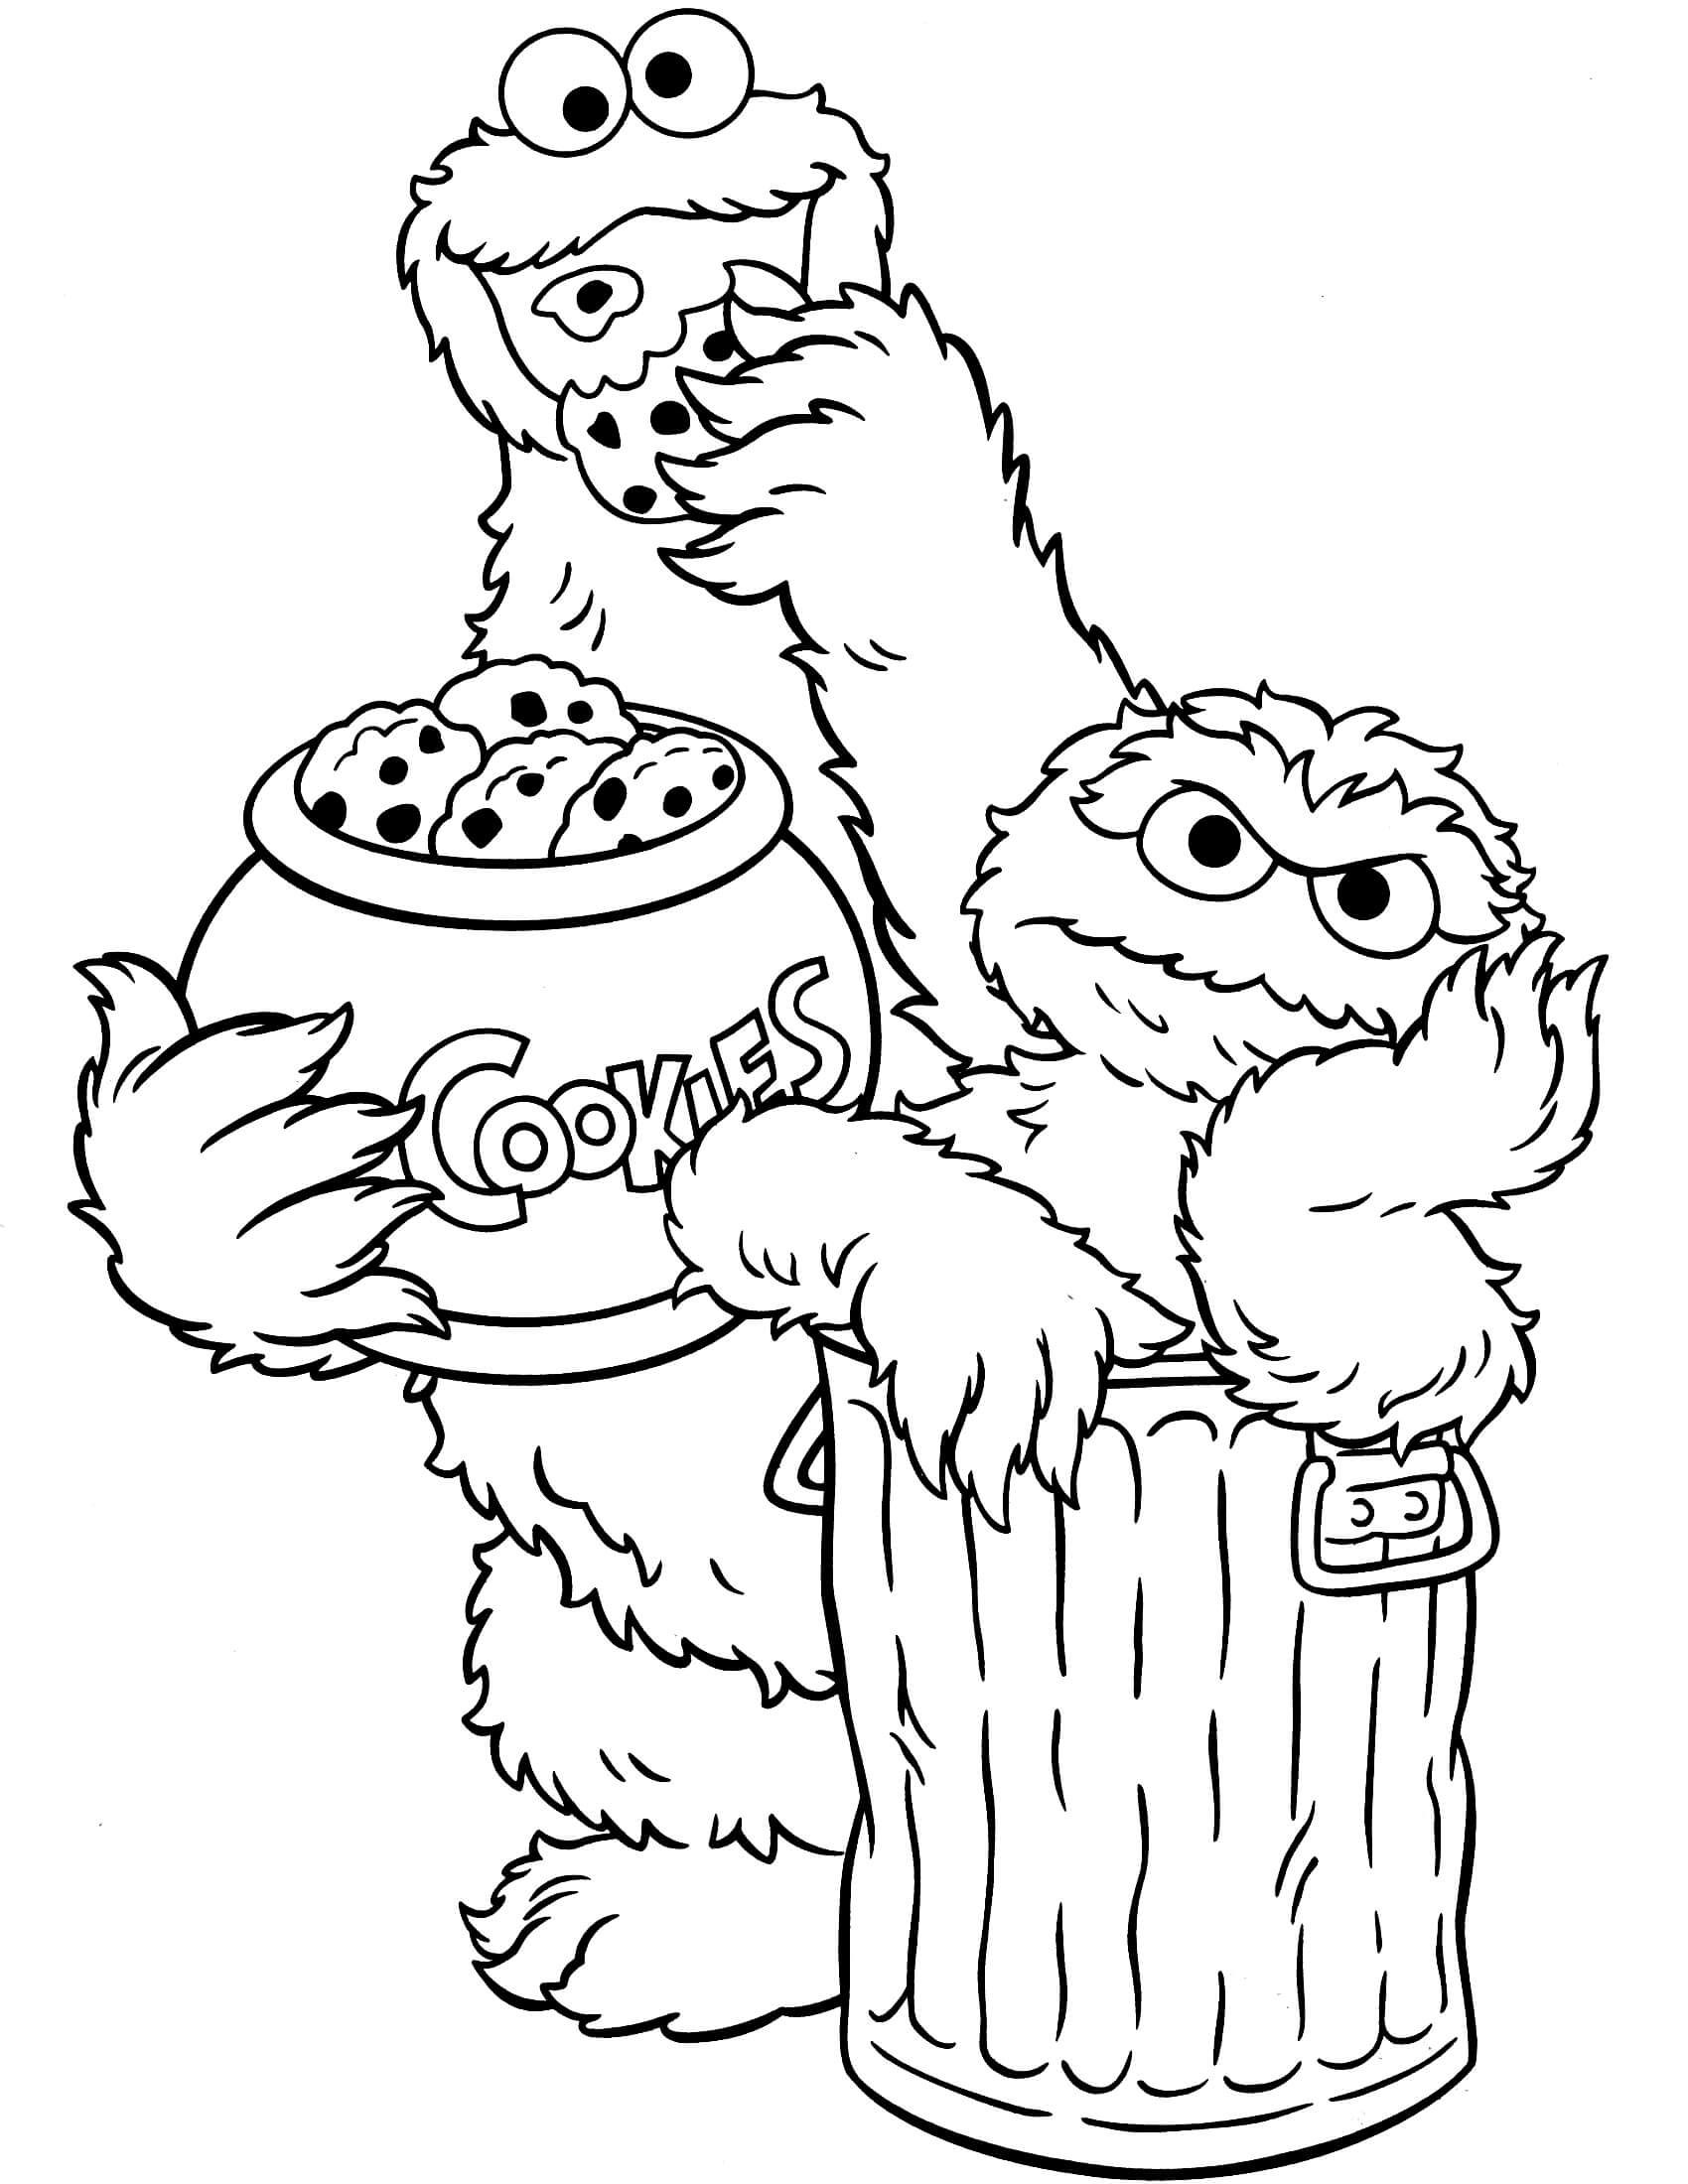 72 Oscar the Grouch Coloring Pages Printable 21